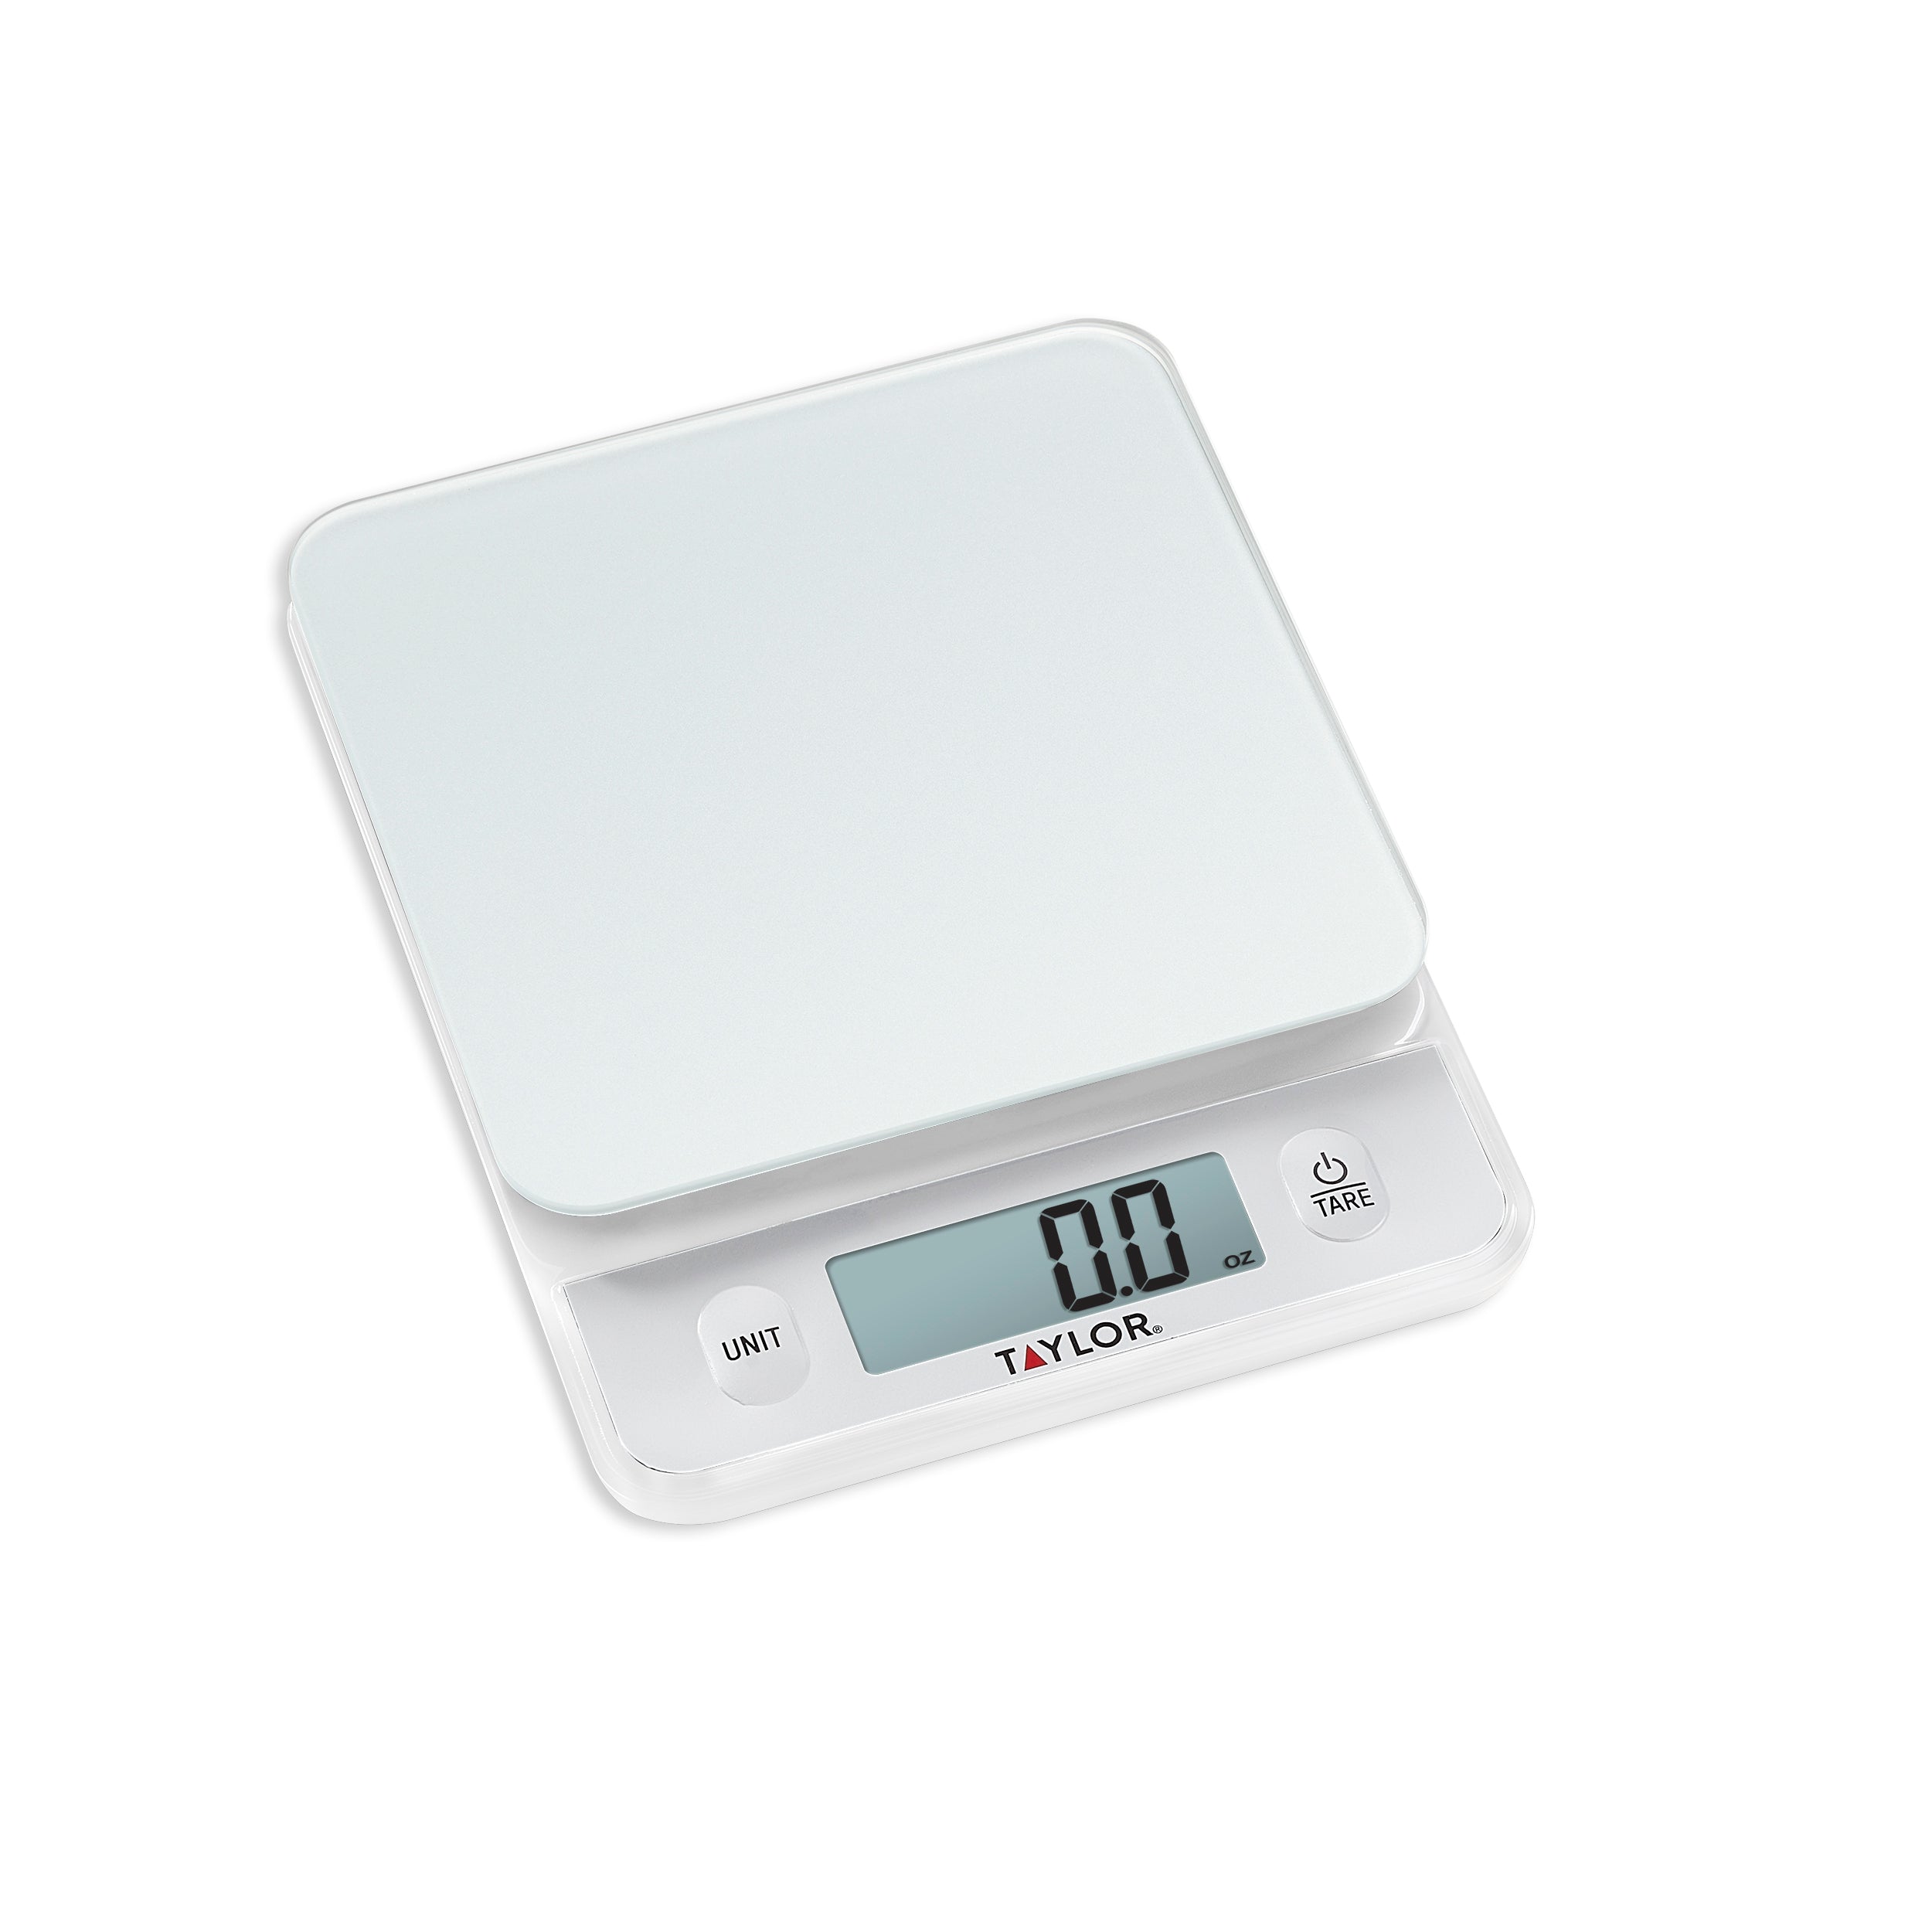 How To Use A Kitchen Food Scale 